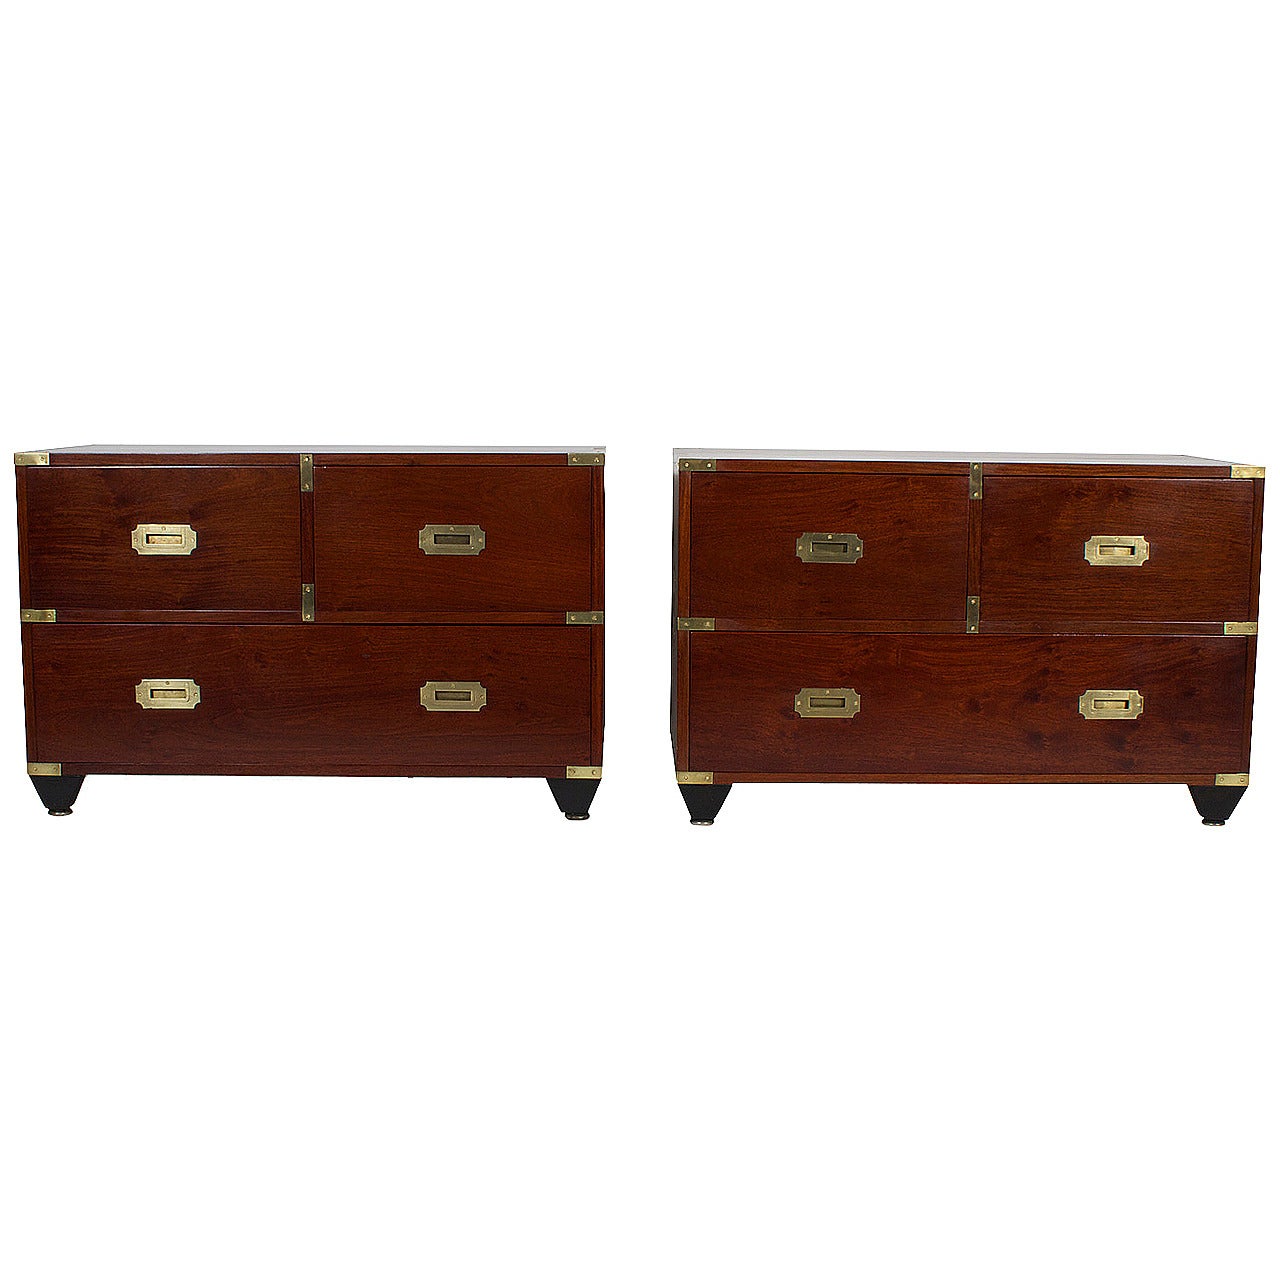 Pair of Labeled Charlotte Horstmann Campaign Style Chests